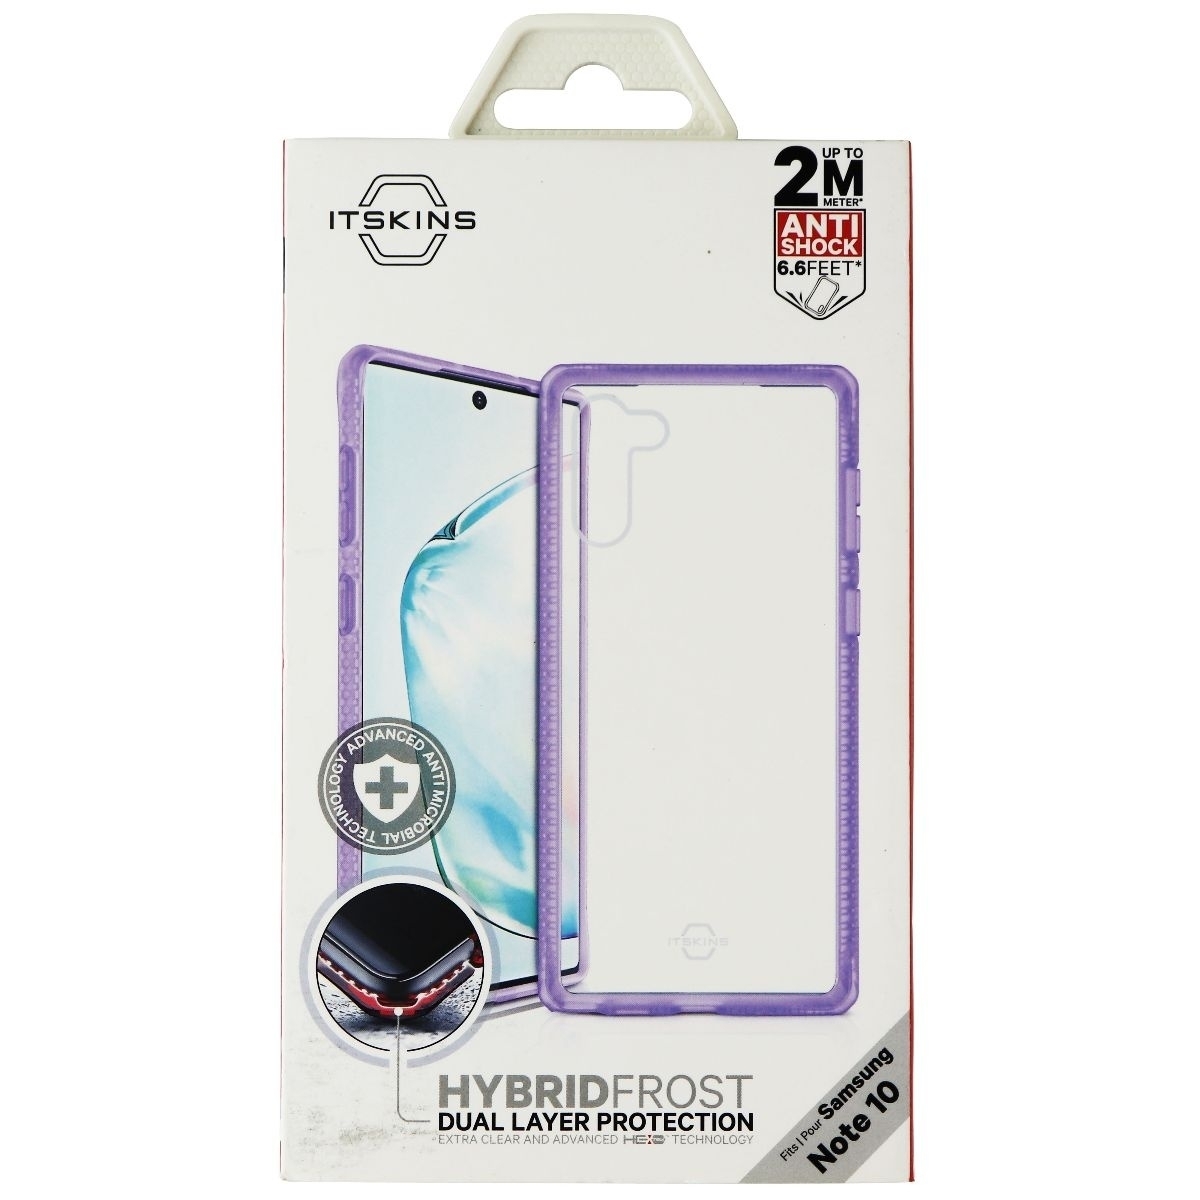 ITSKINS Hybrid Frost Dual Layer Case For Samsung Galaxy Note10 - Purple/Clear